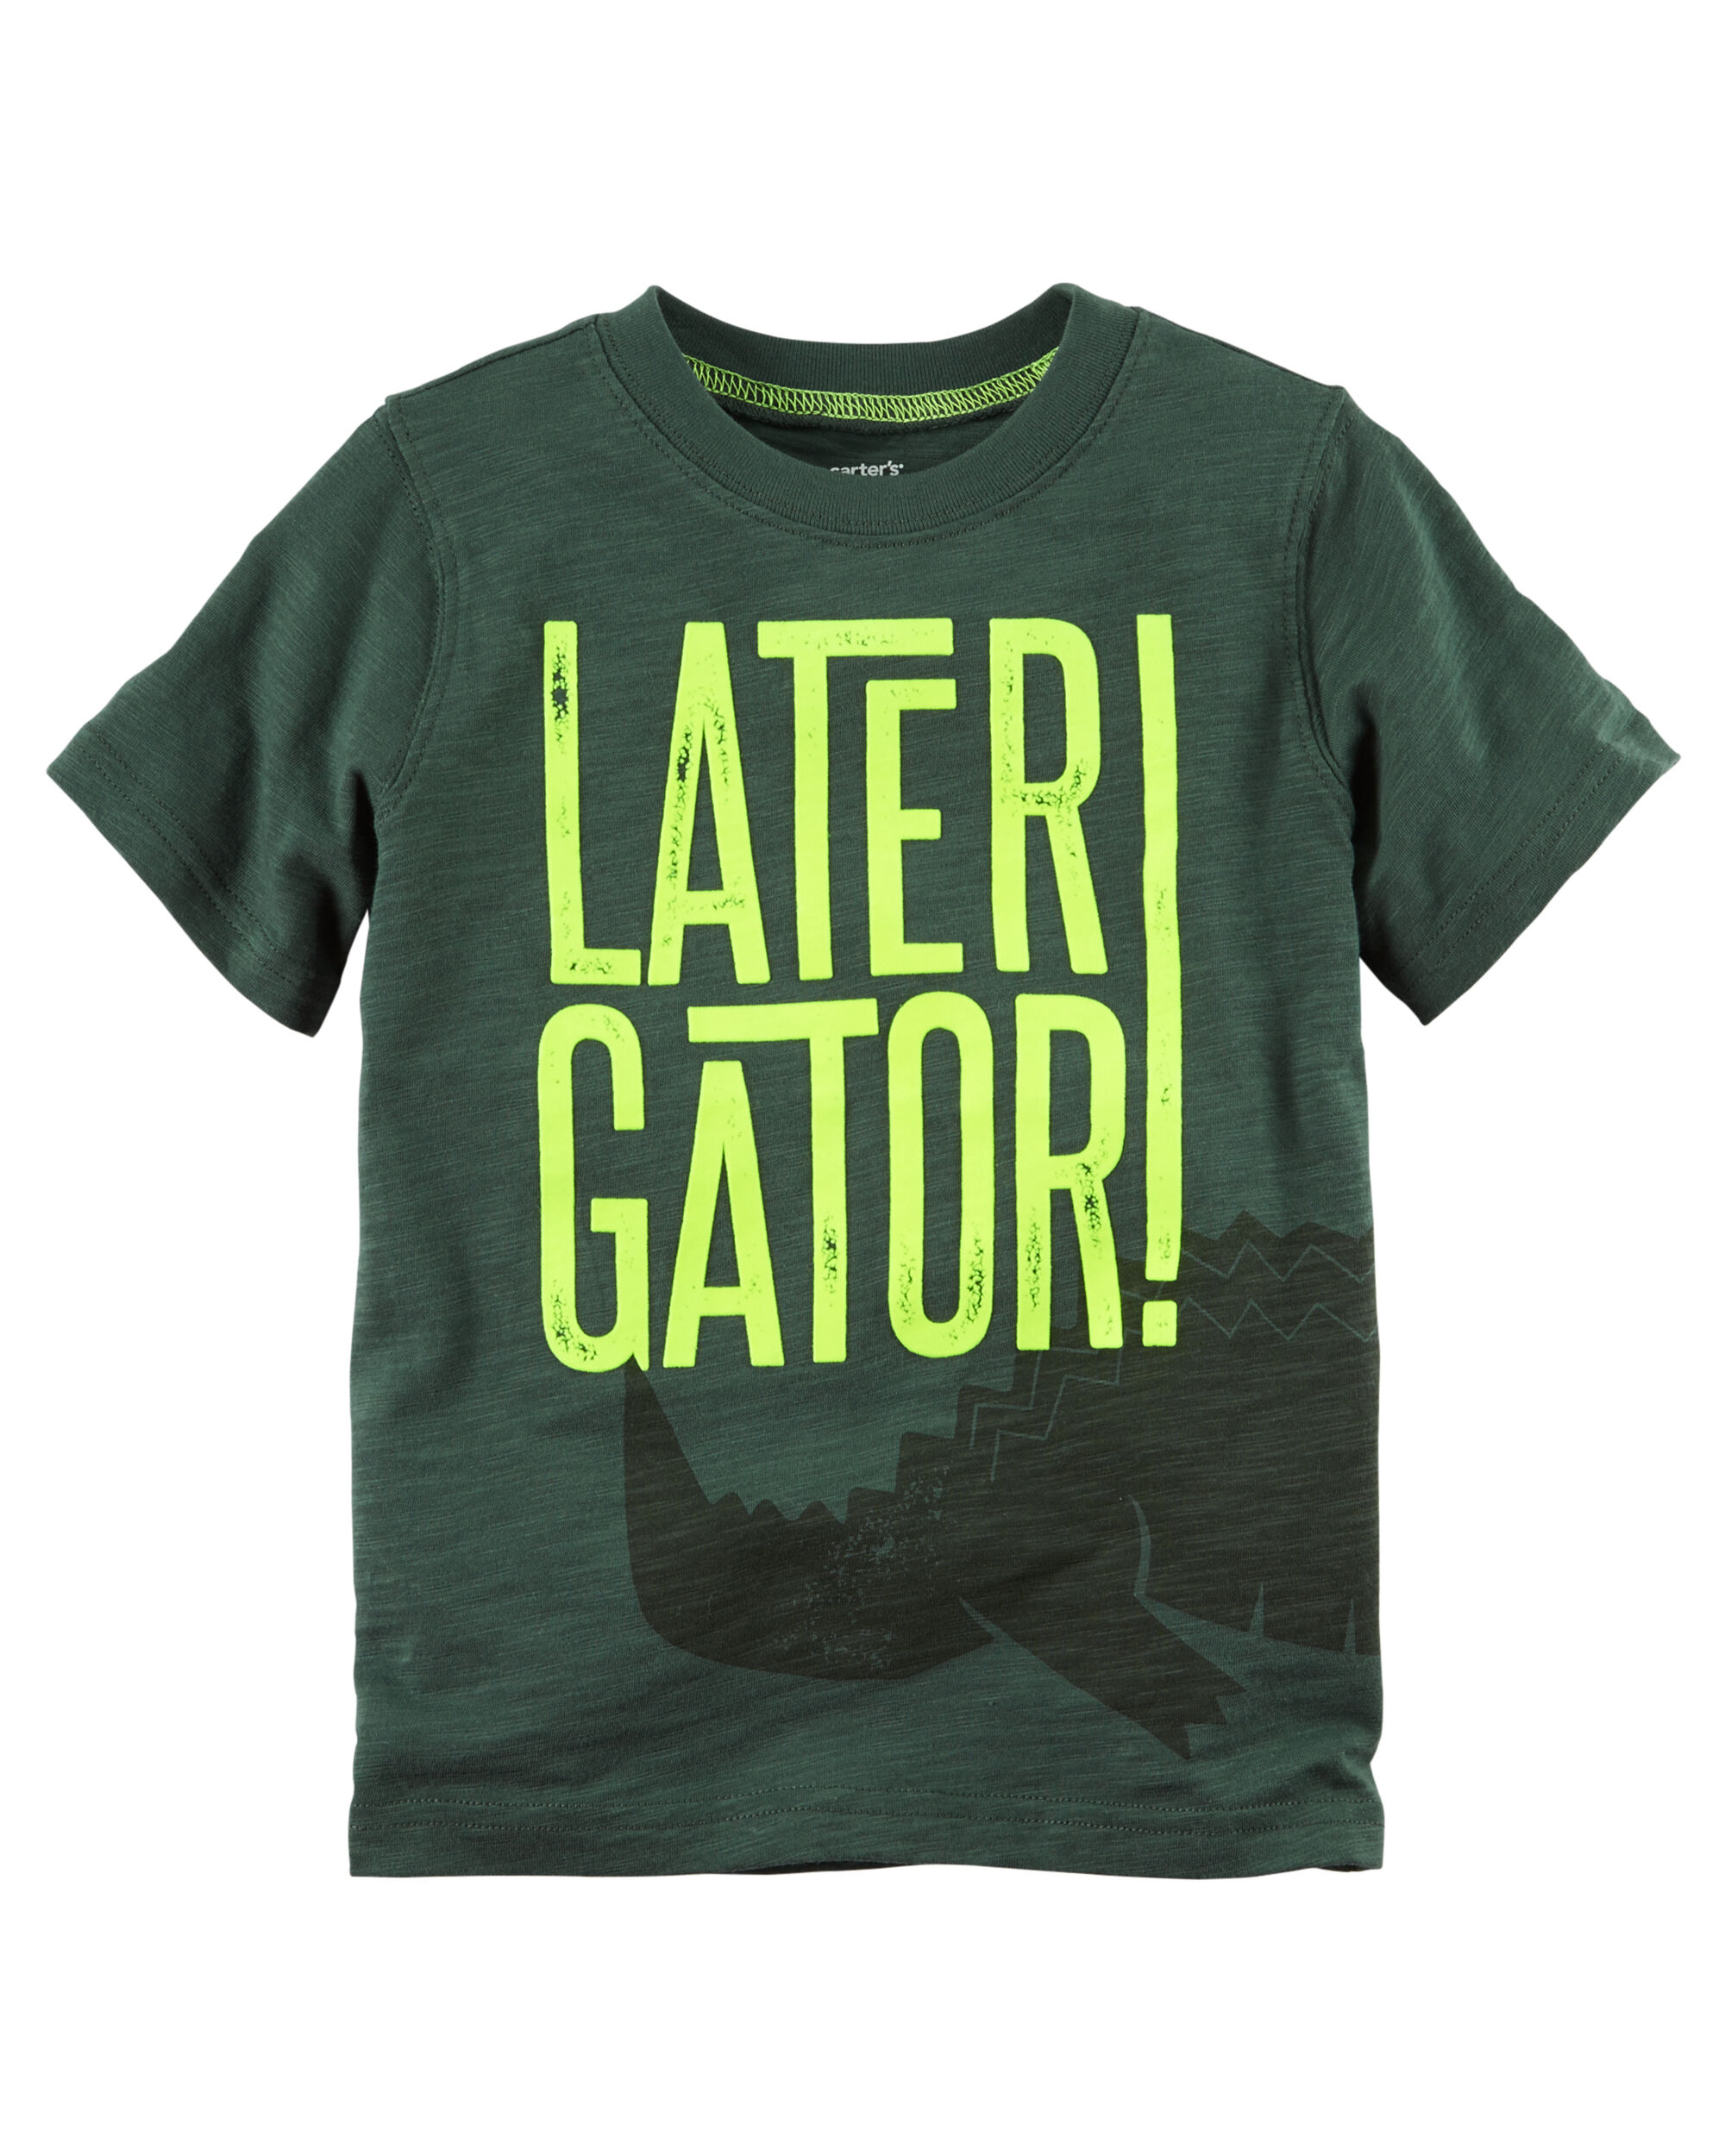 Later Gator Graphic Tee | carters.com